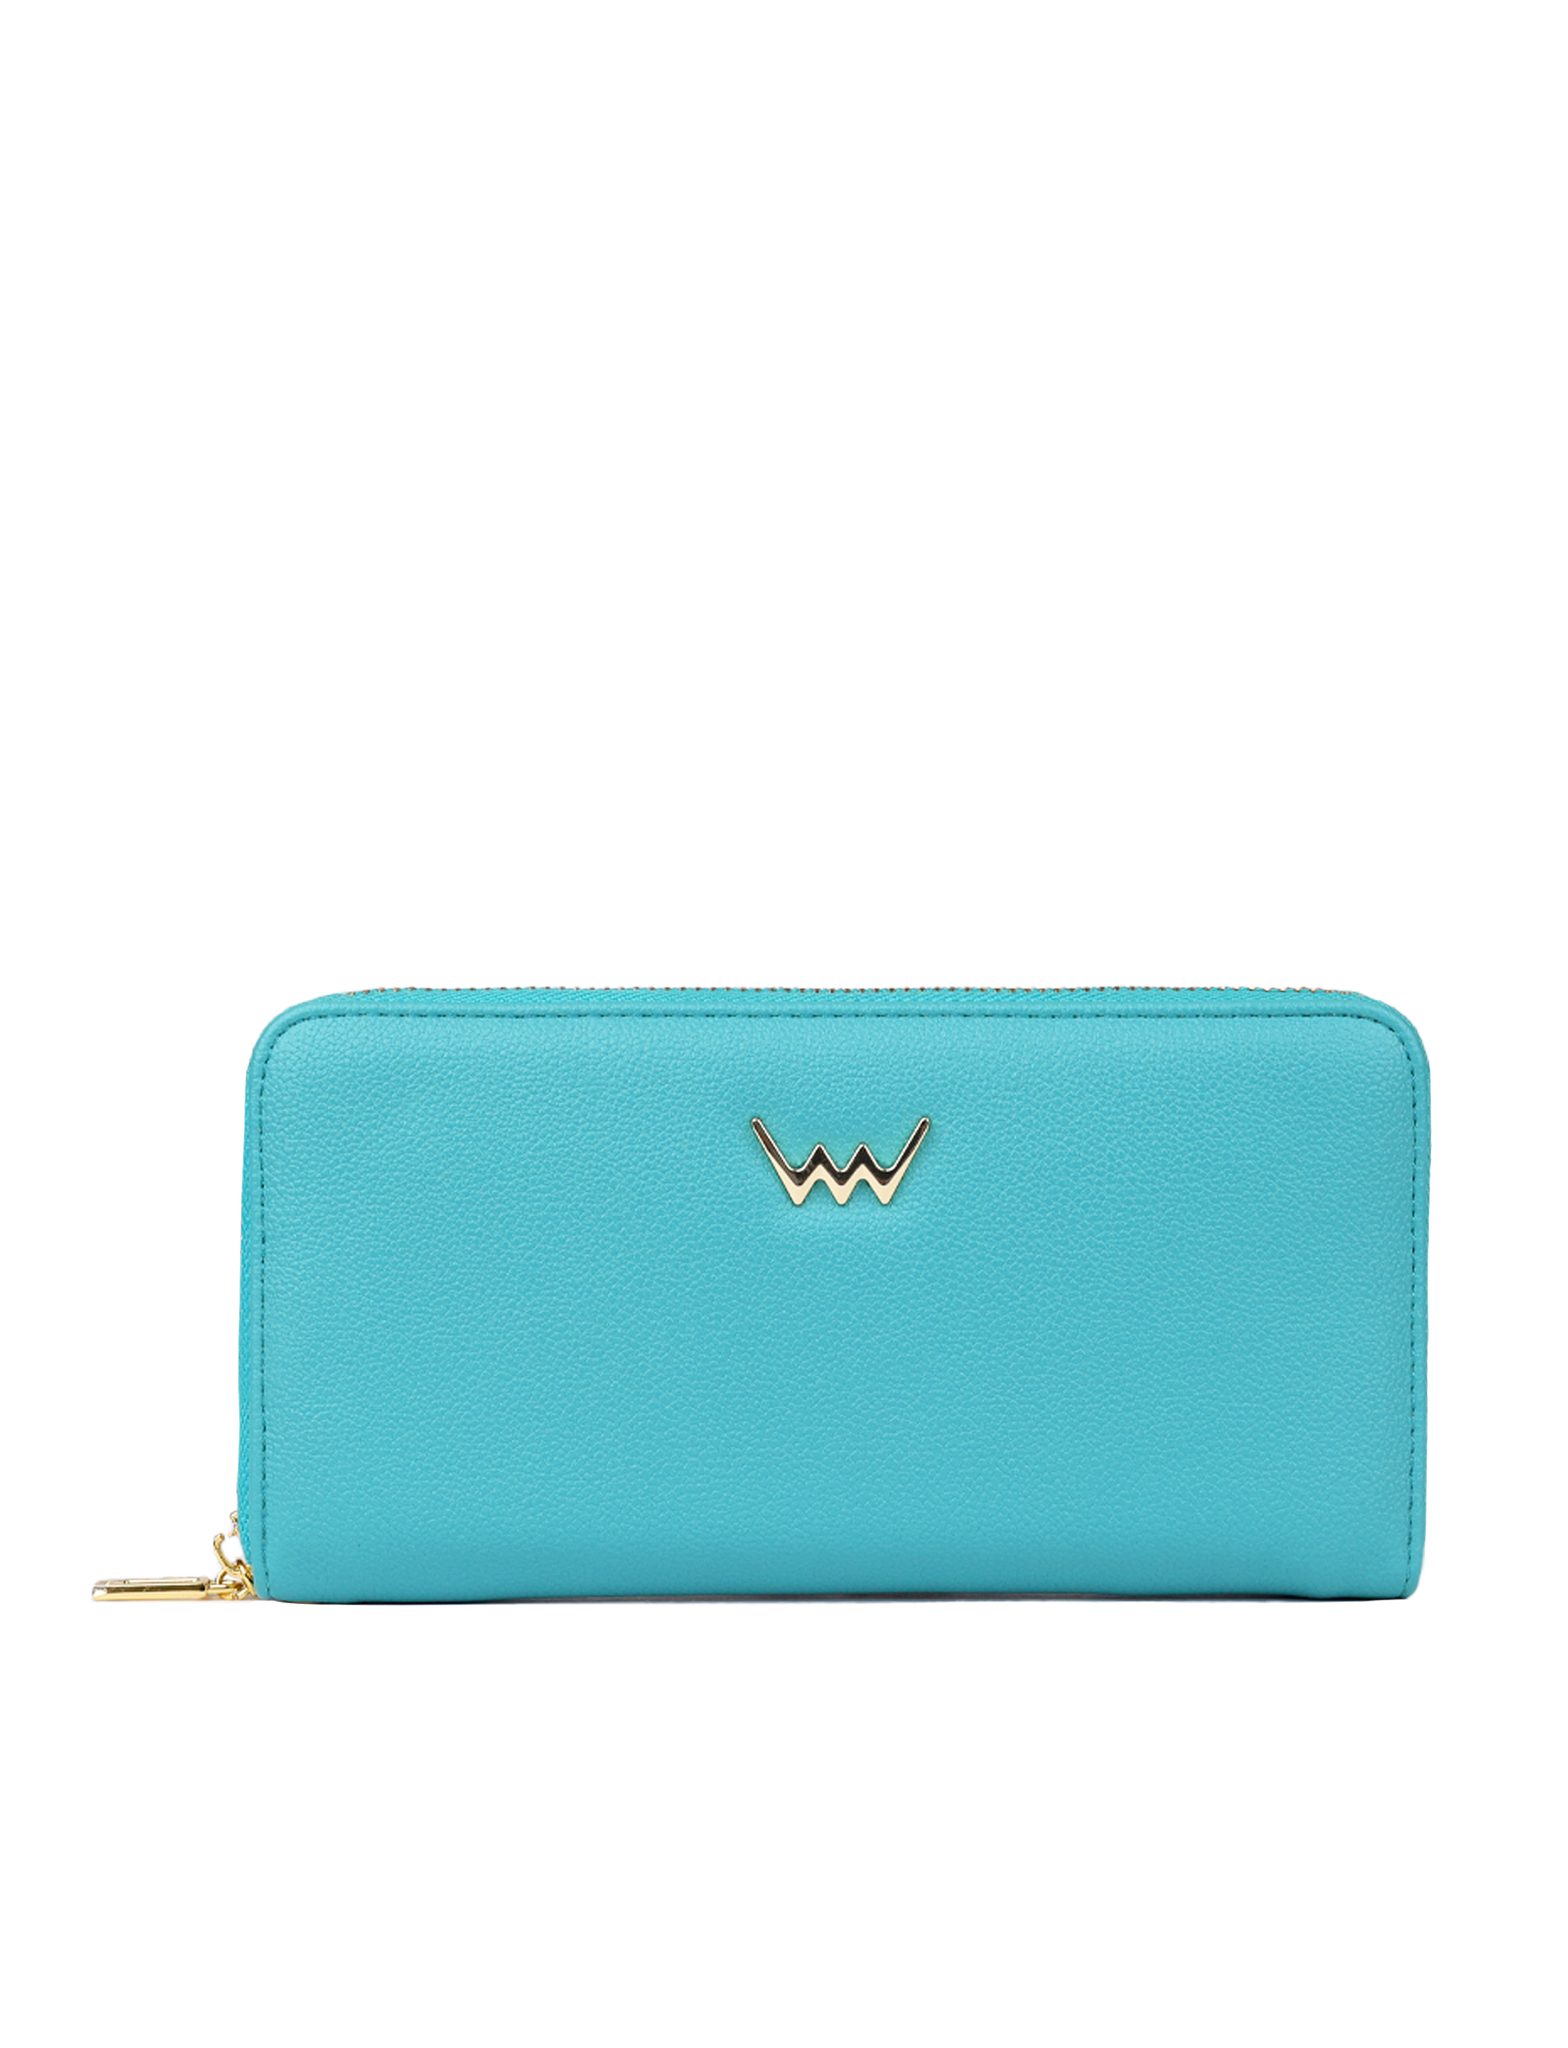 VUCH Taylor Terry Wallet